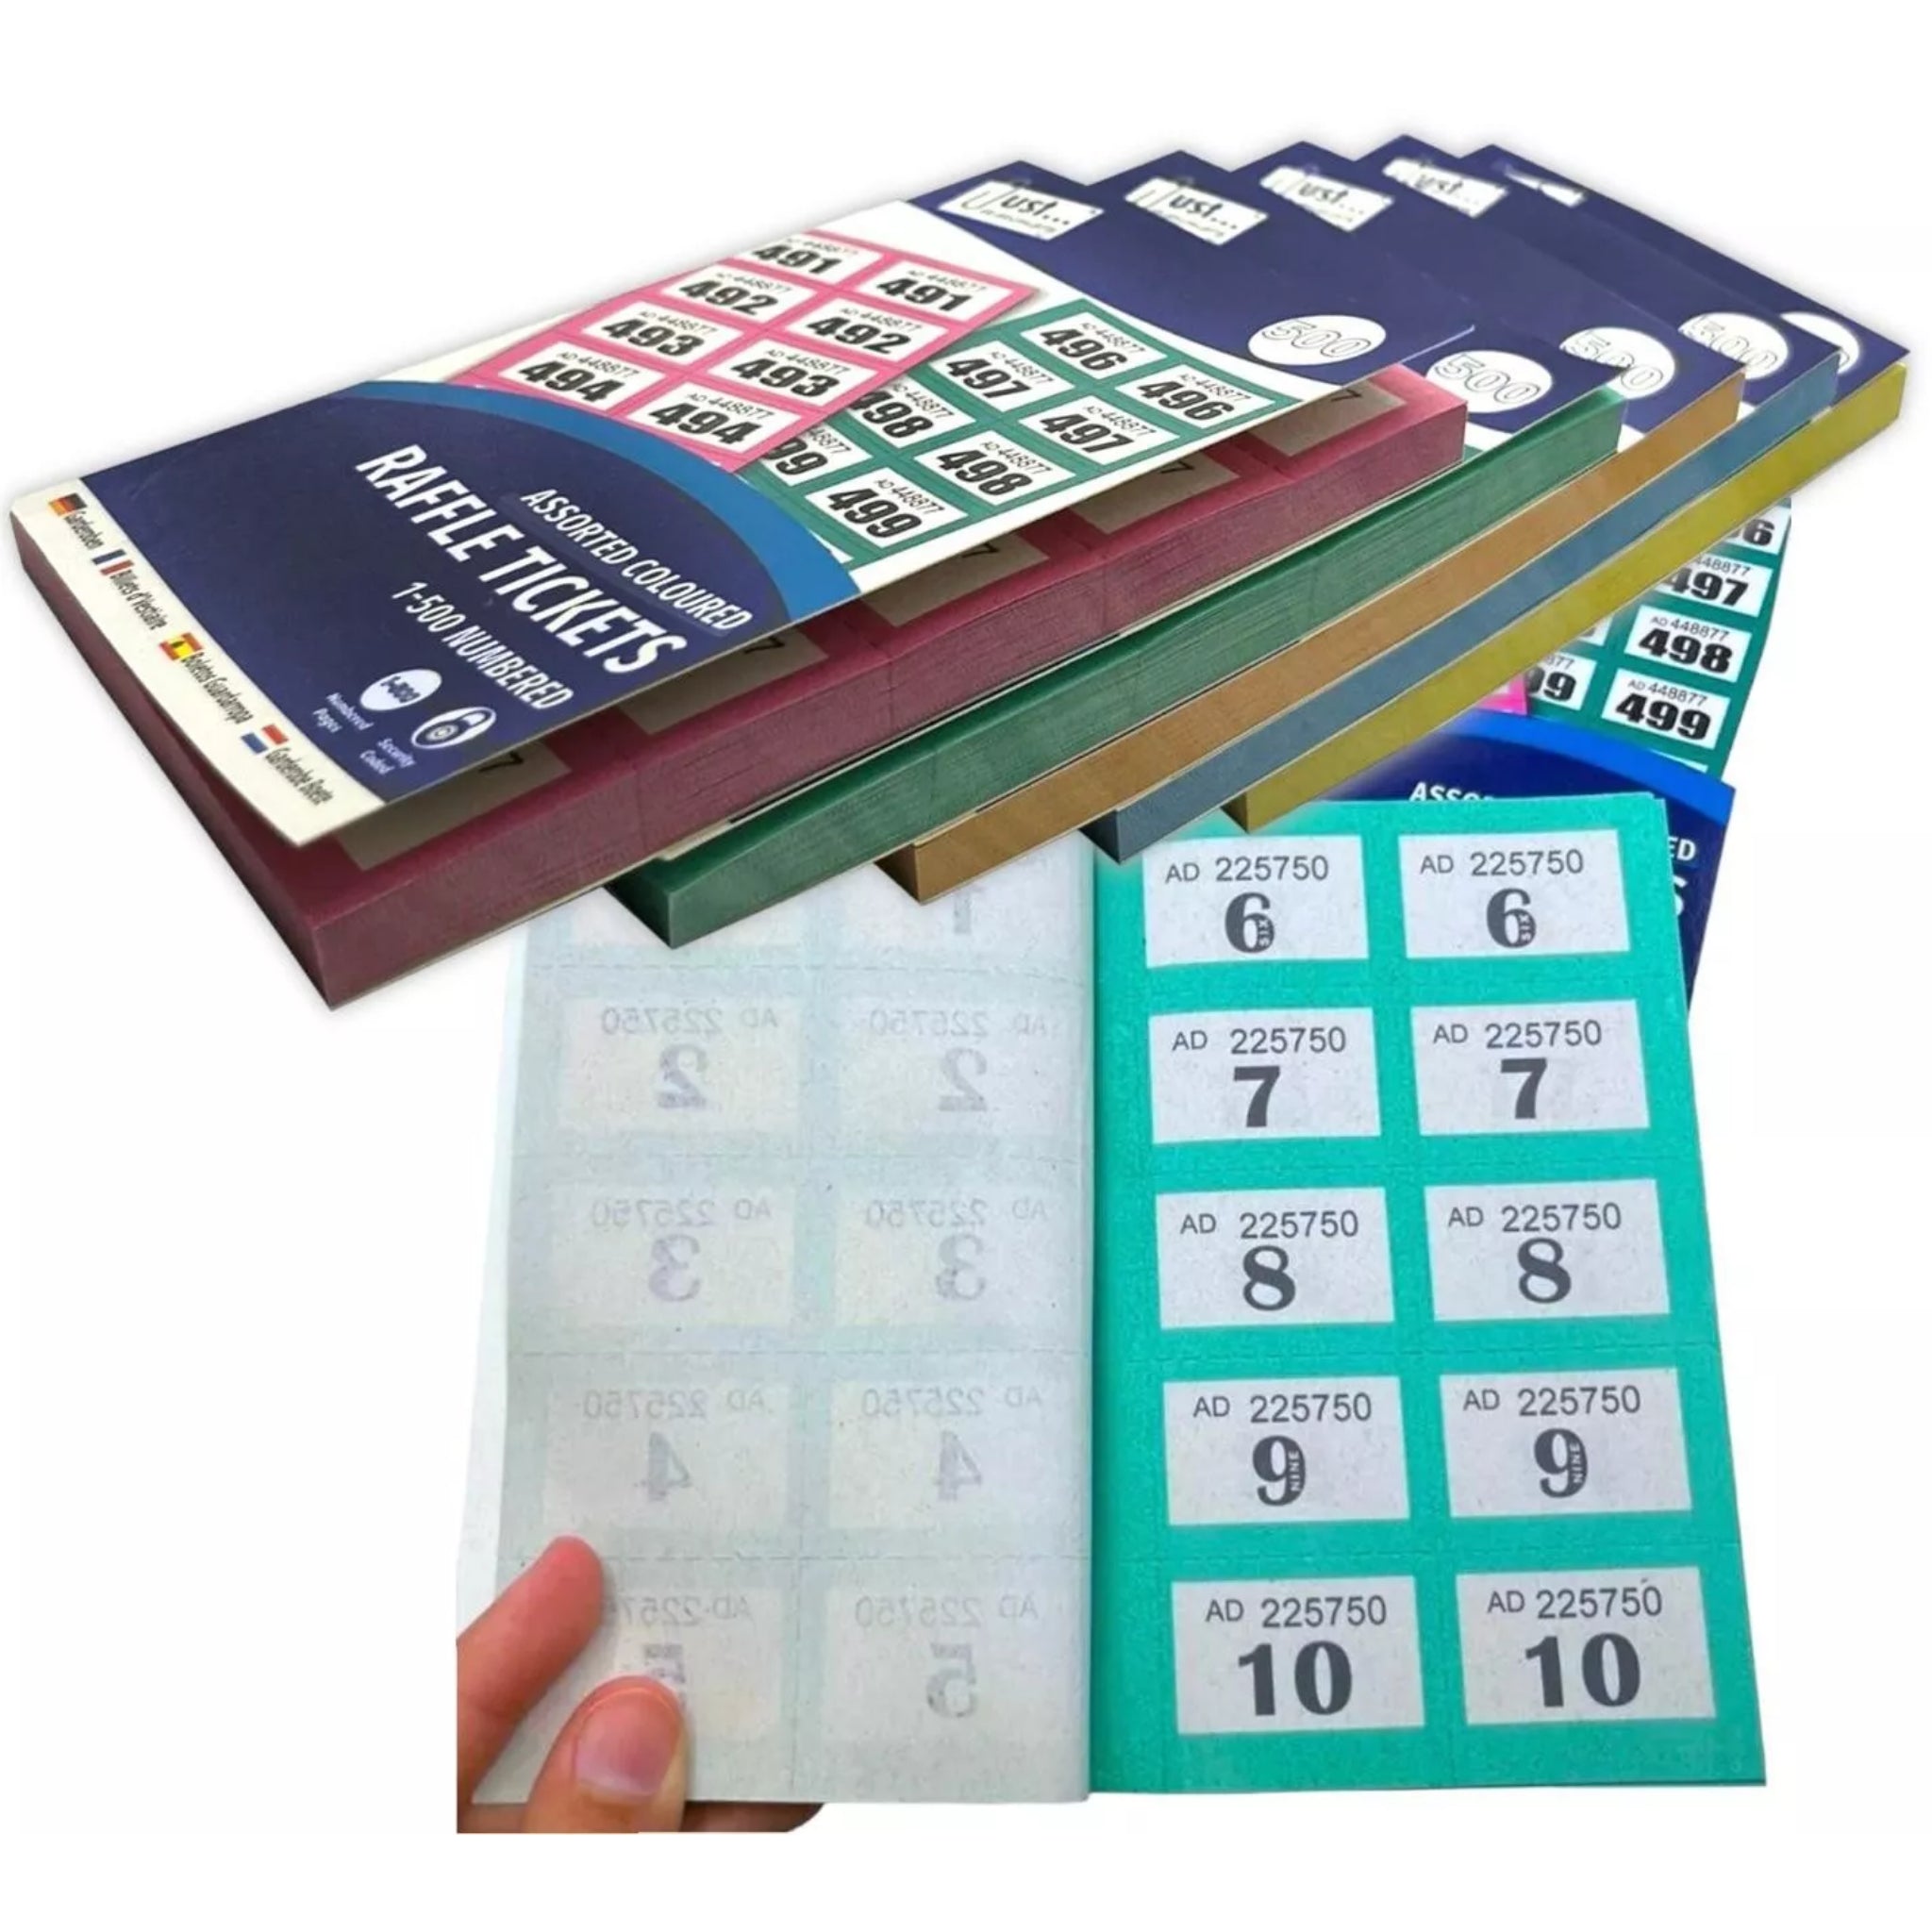 Beclen Harp 12 x Books of 1-500 Cloakroom Raffle Tombola New Draw Tickets Numbered Mixed colours